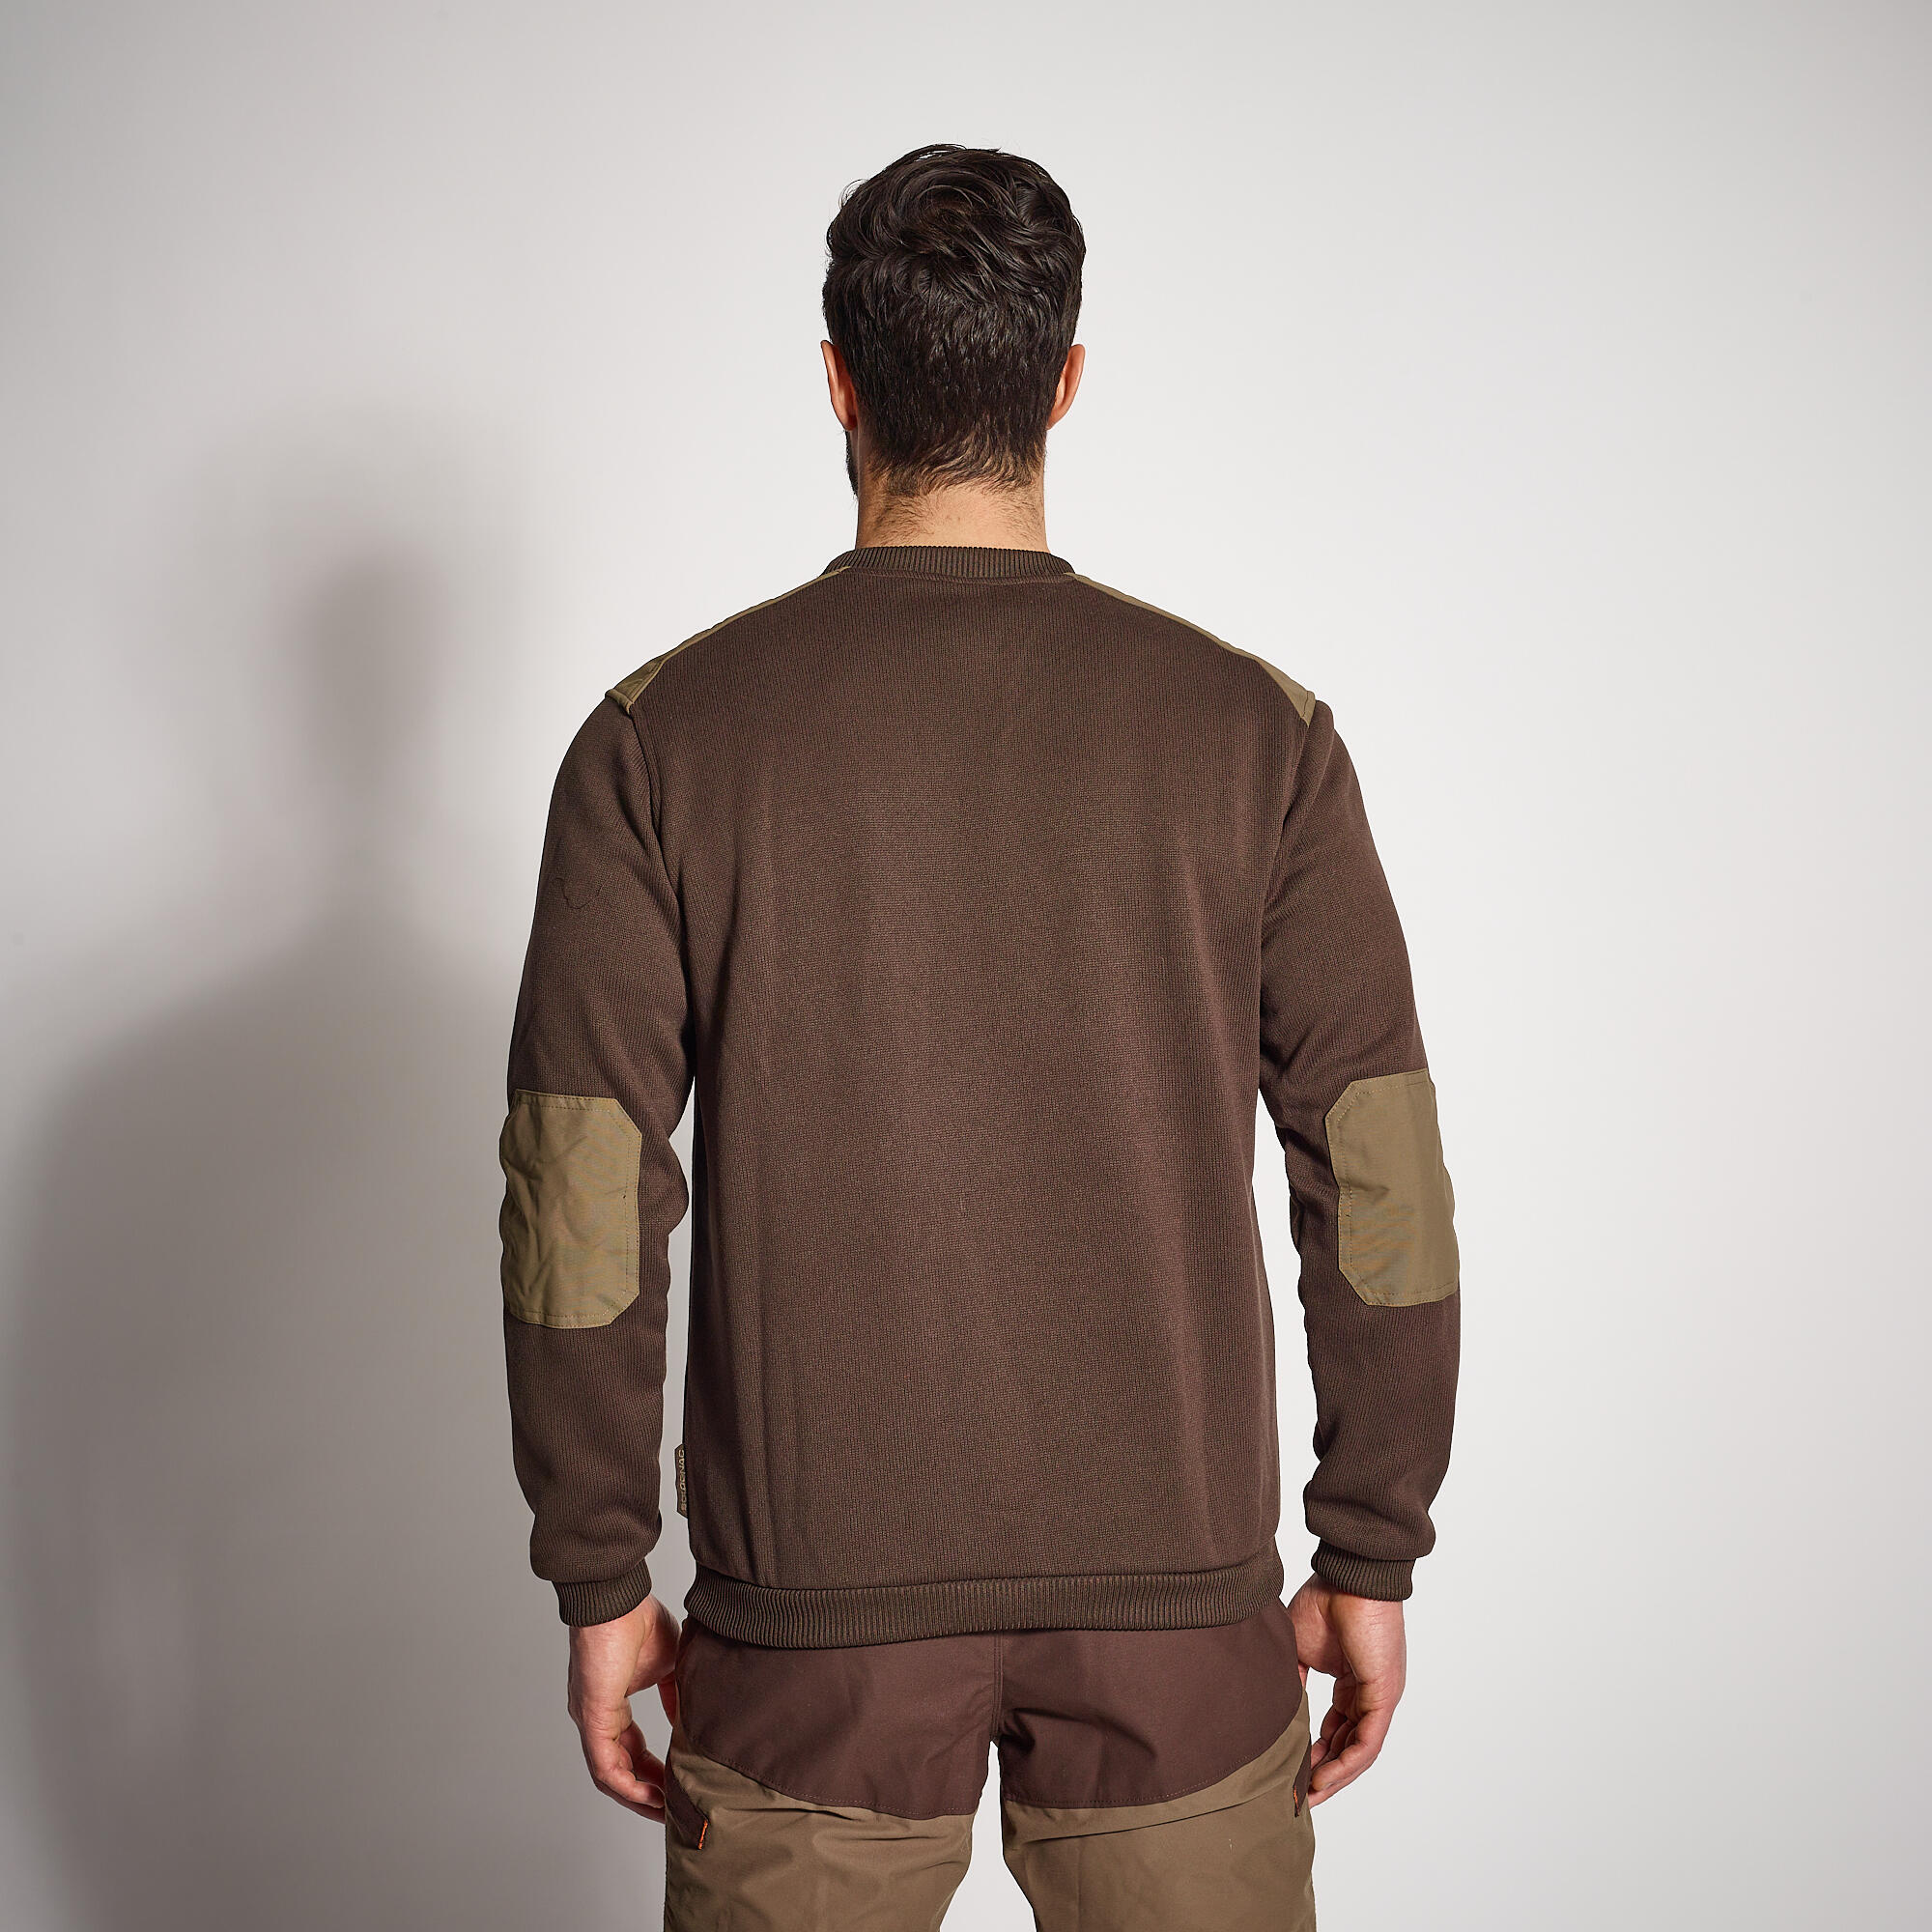 PULLOVER 500 BROWN 2/6